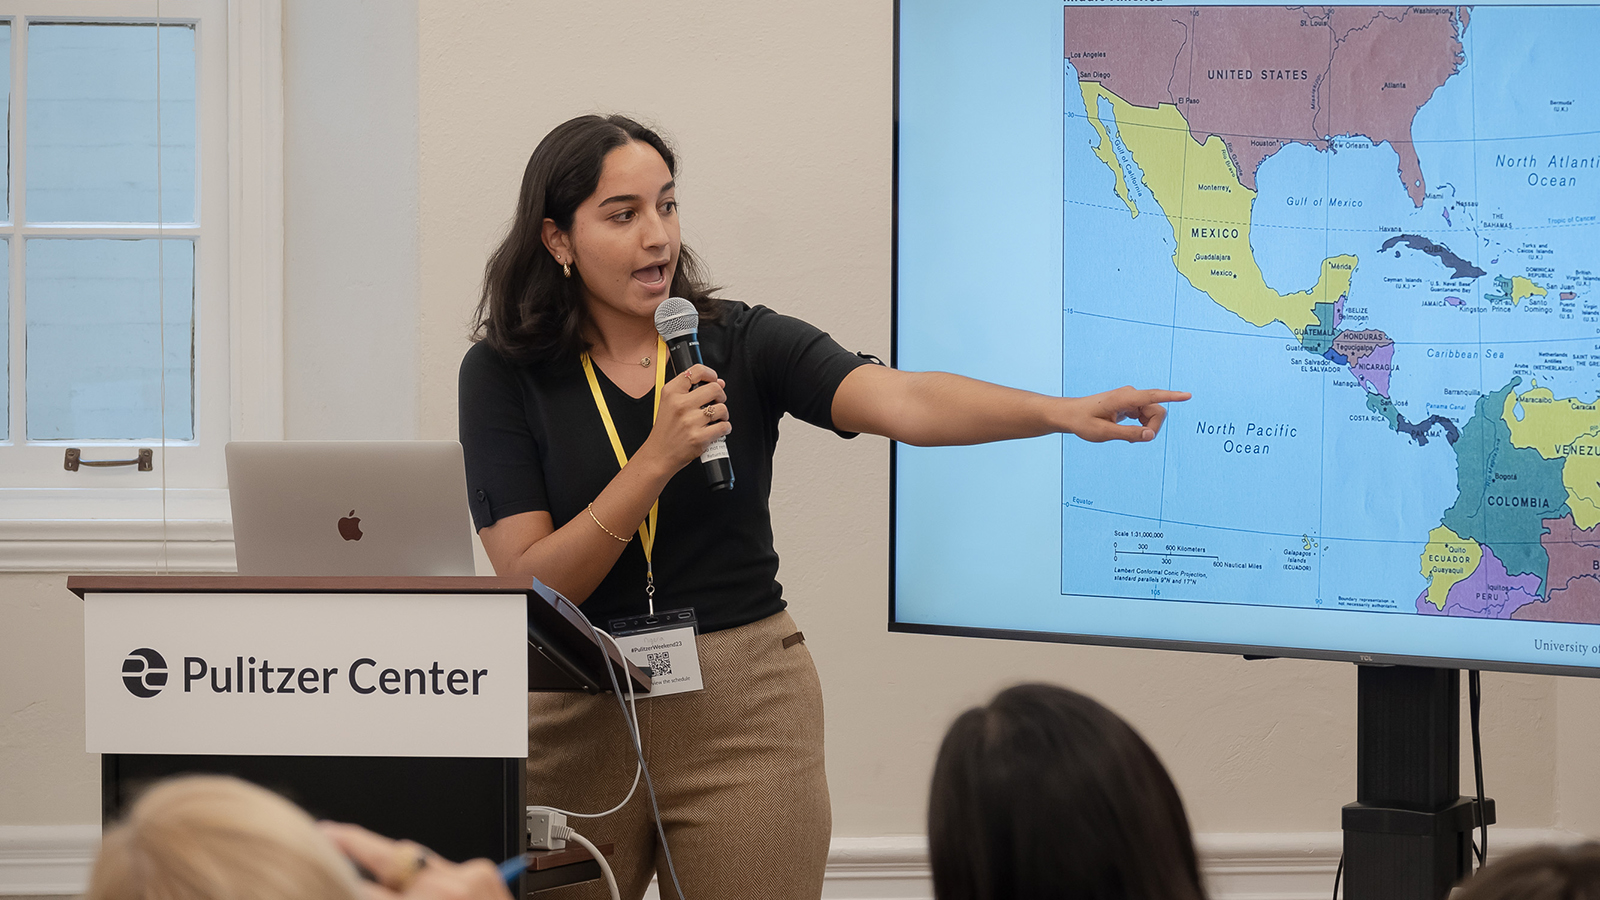 A young female reporter stands at a branded Pulitzer Center podium, pointing to a map of Central America.